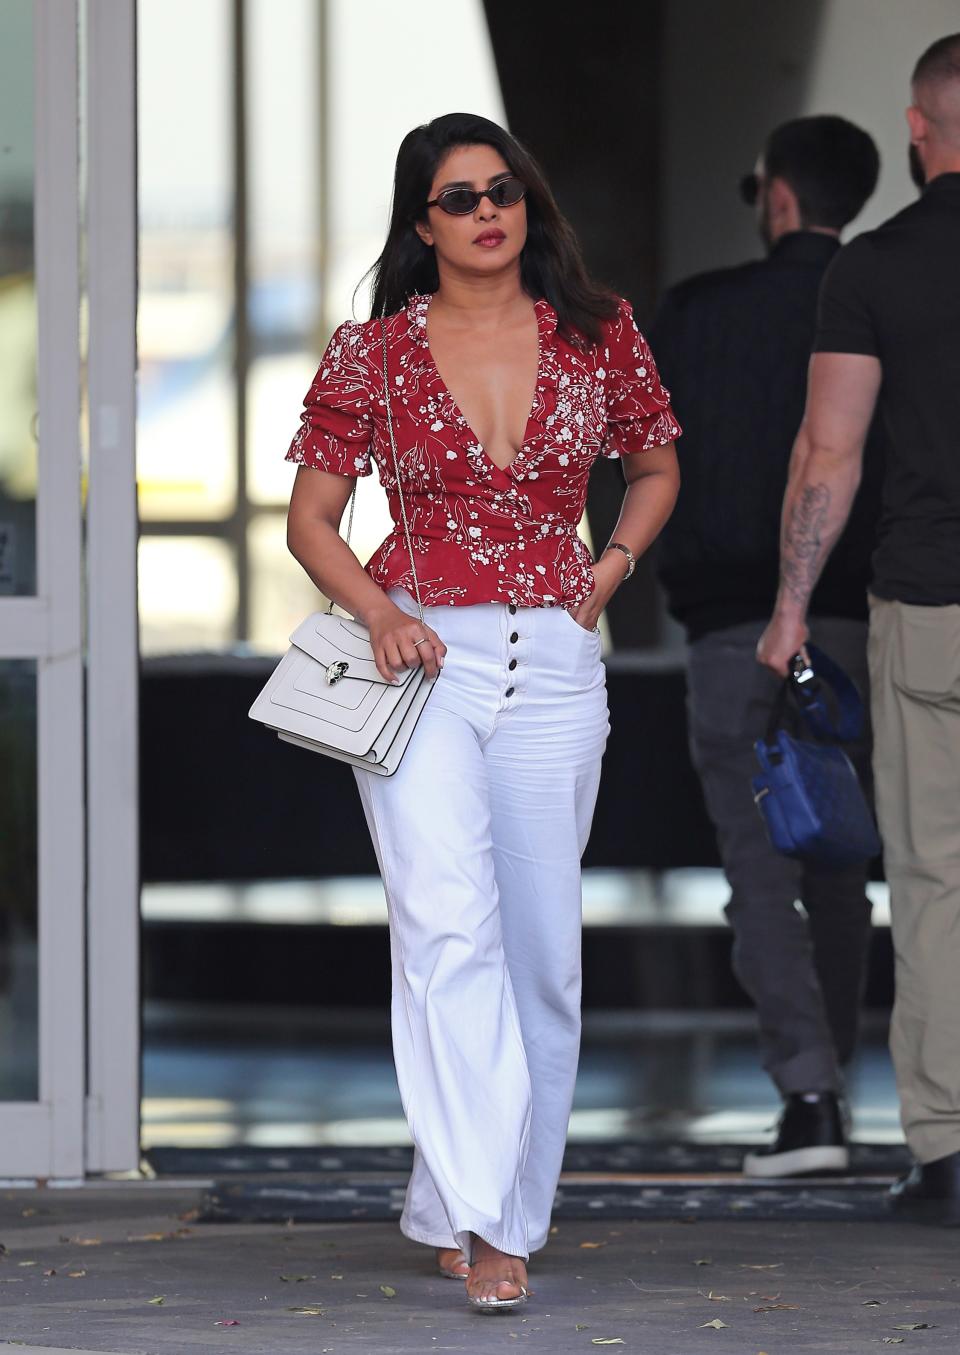 <h1 class="title">EXCLUSIVE: Priyanka Chopra Looks Radiant In A Plunging Red Blouse As She Touches Down At Million Air Burbank In Los Angeles, CA</h1><cite class="credit">SplashNews.com</cite>